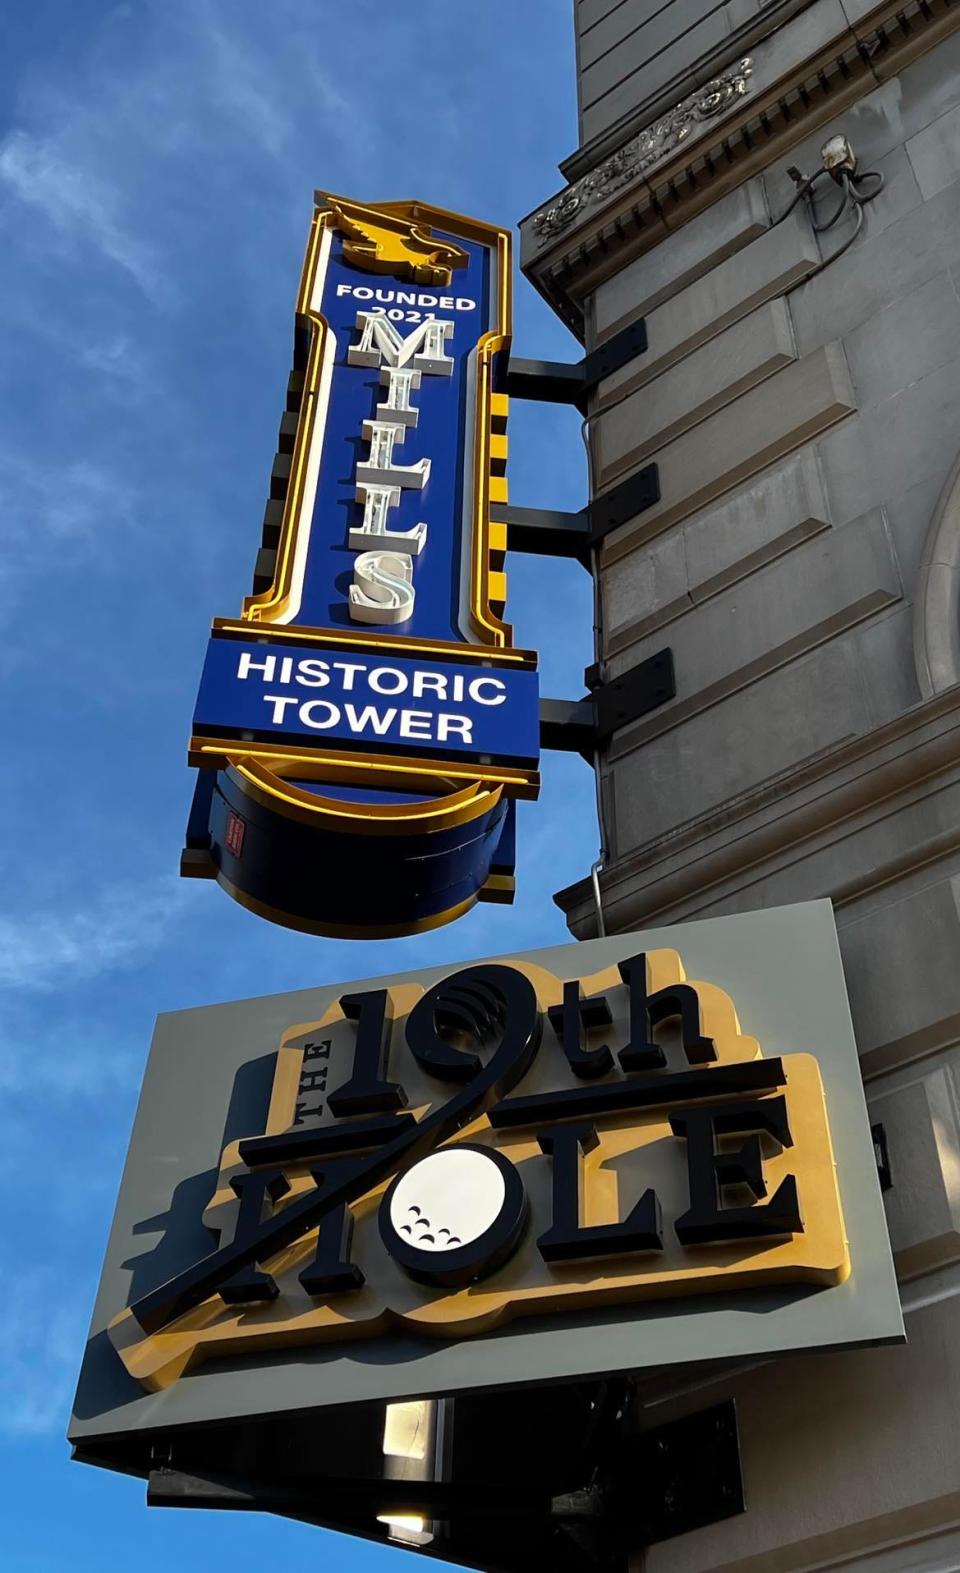 The 19th Hole is scheduled to open in November in downtown Canton across from the Stark County Courthouse at Tuscarawas Street and Market Avenue. The business will combine golf simulators with food and drinks in a historic building.